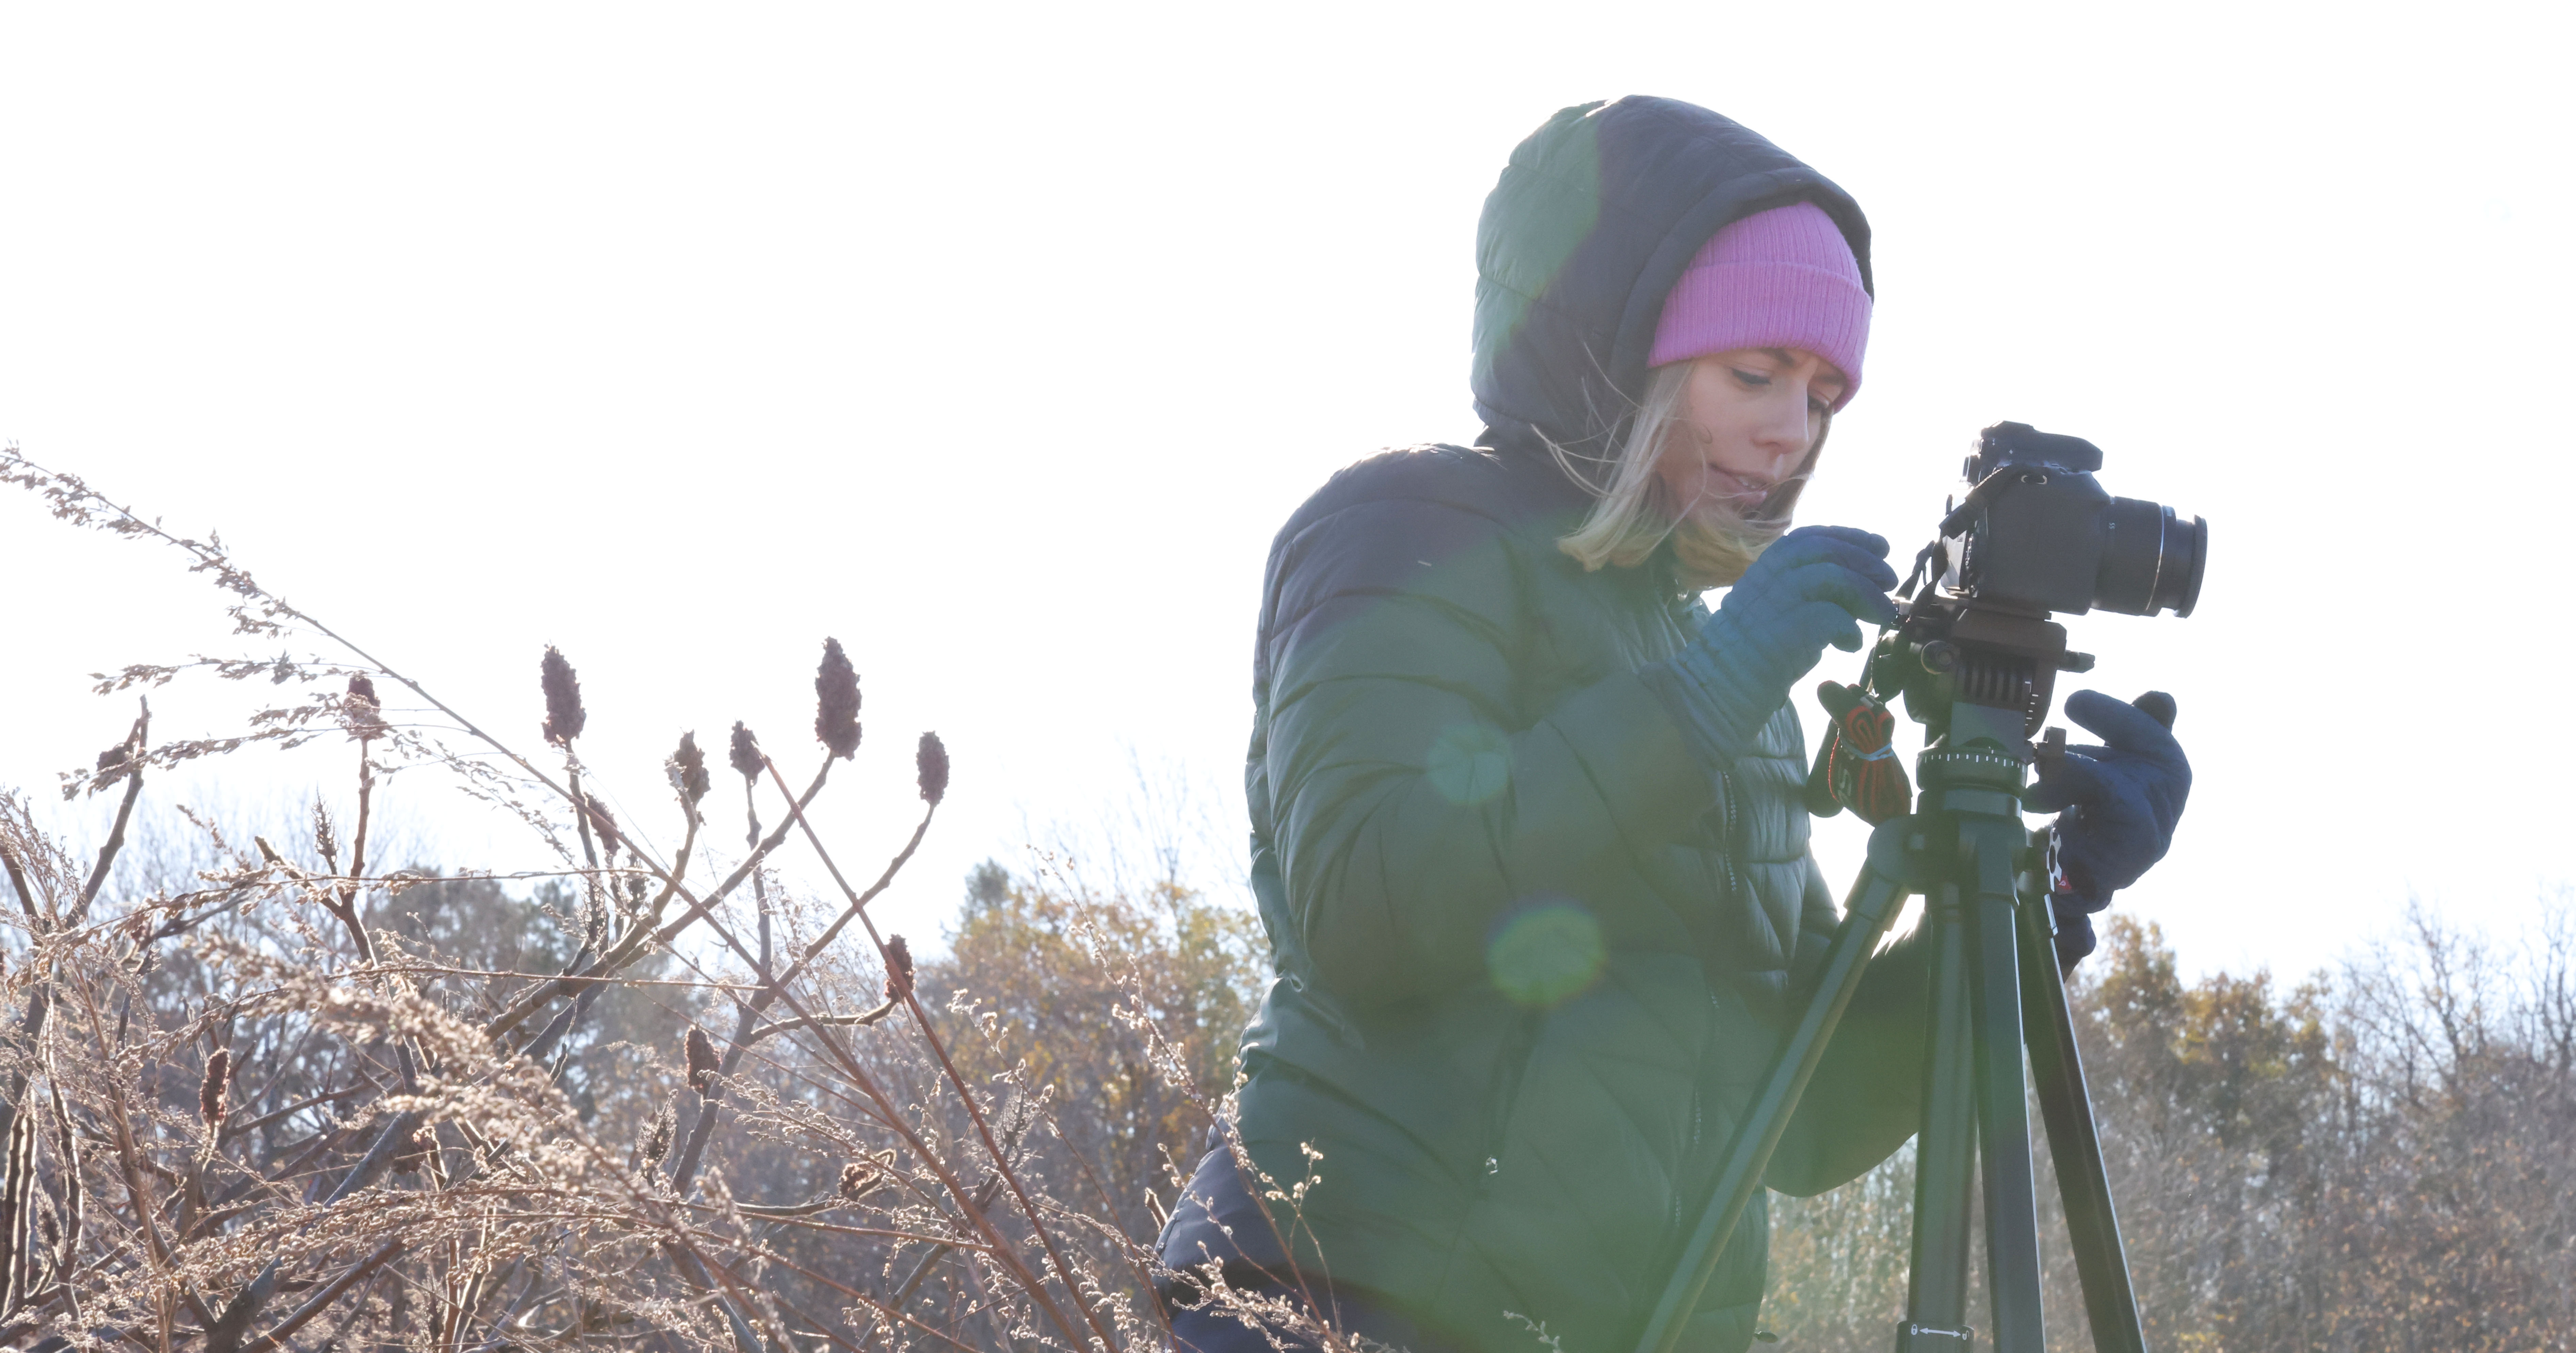 A person in a black coat, gloves, and a purple hat adjusts the settings on a camera attached to a tripod. The sky is grey and there are reeds and low shrubs in the foreground.